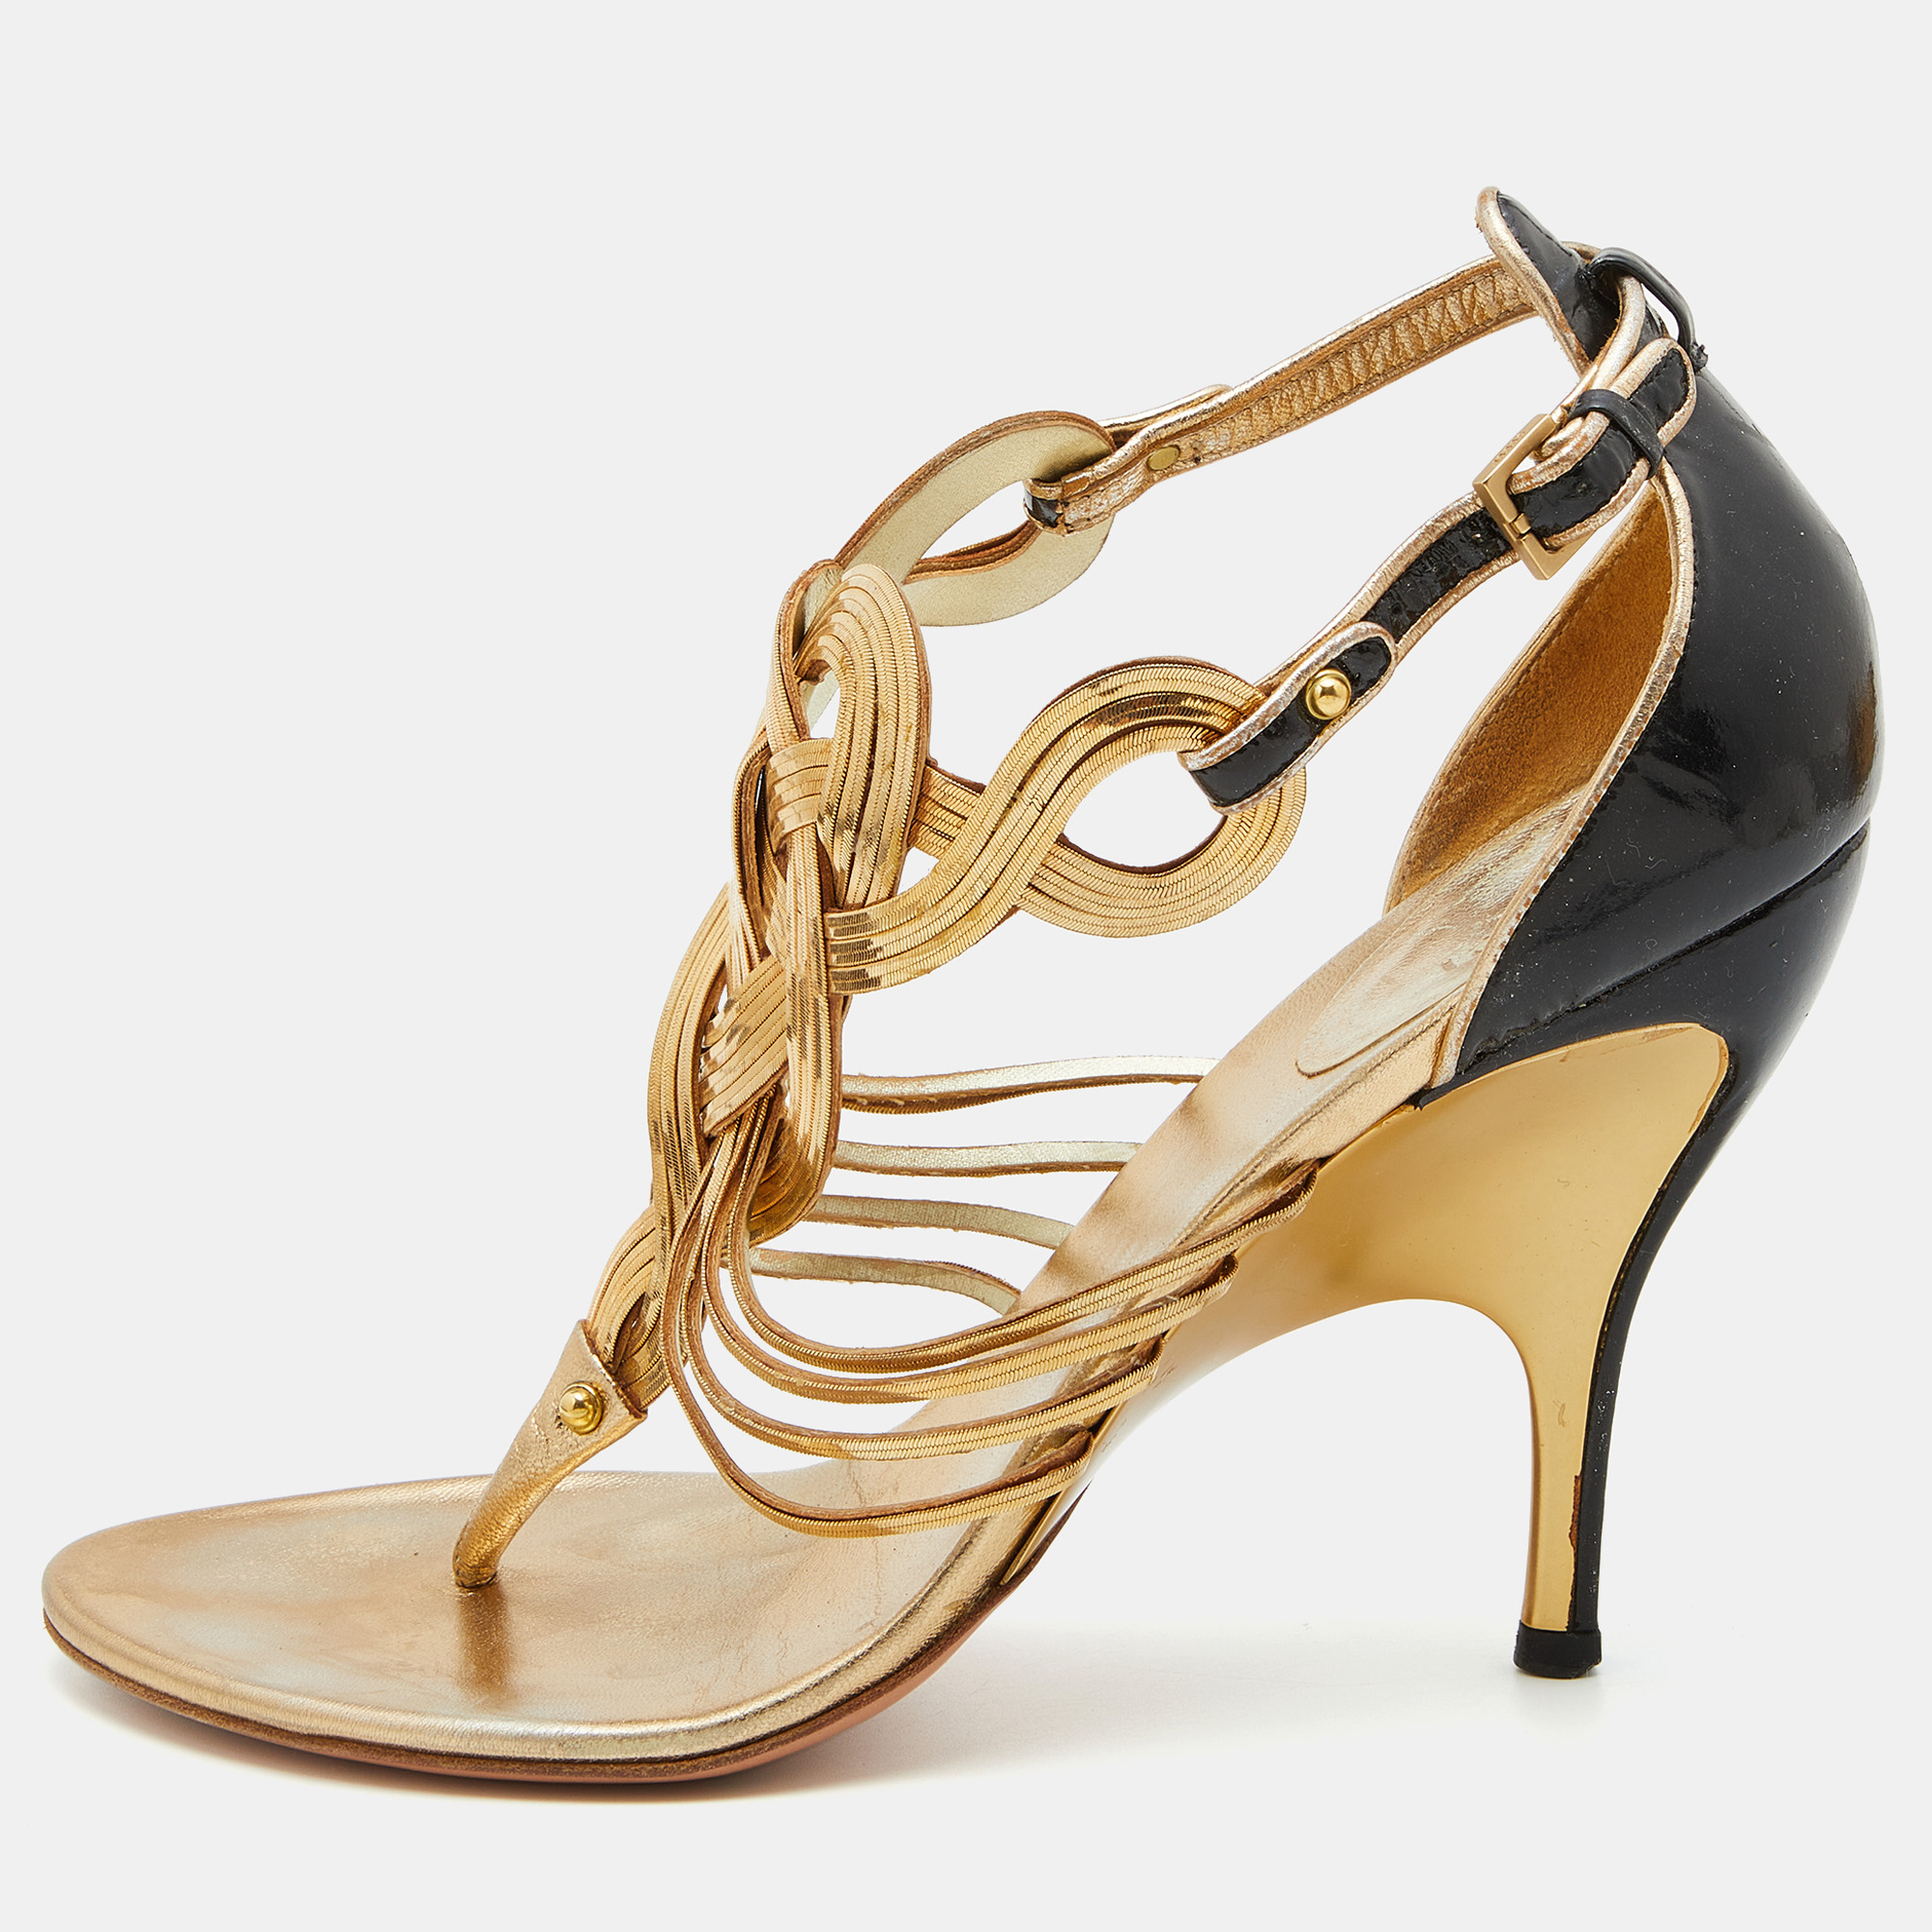 Pre-owned Gucci Metallic Gold/black Leather Chain Occasion Ankle Strap Sandals Size 38